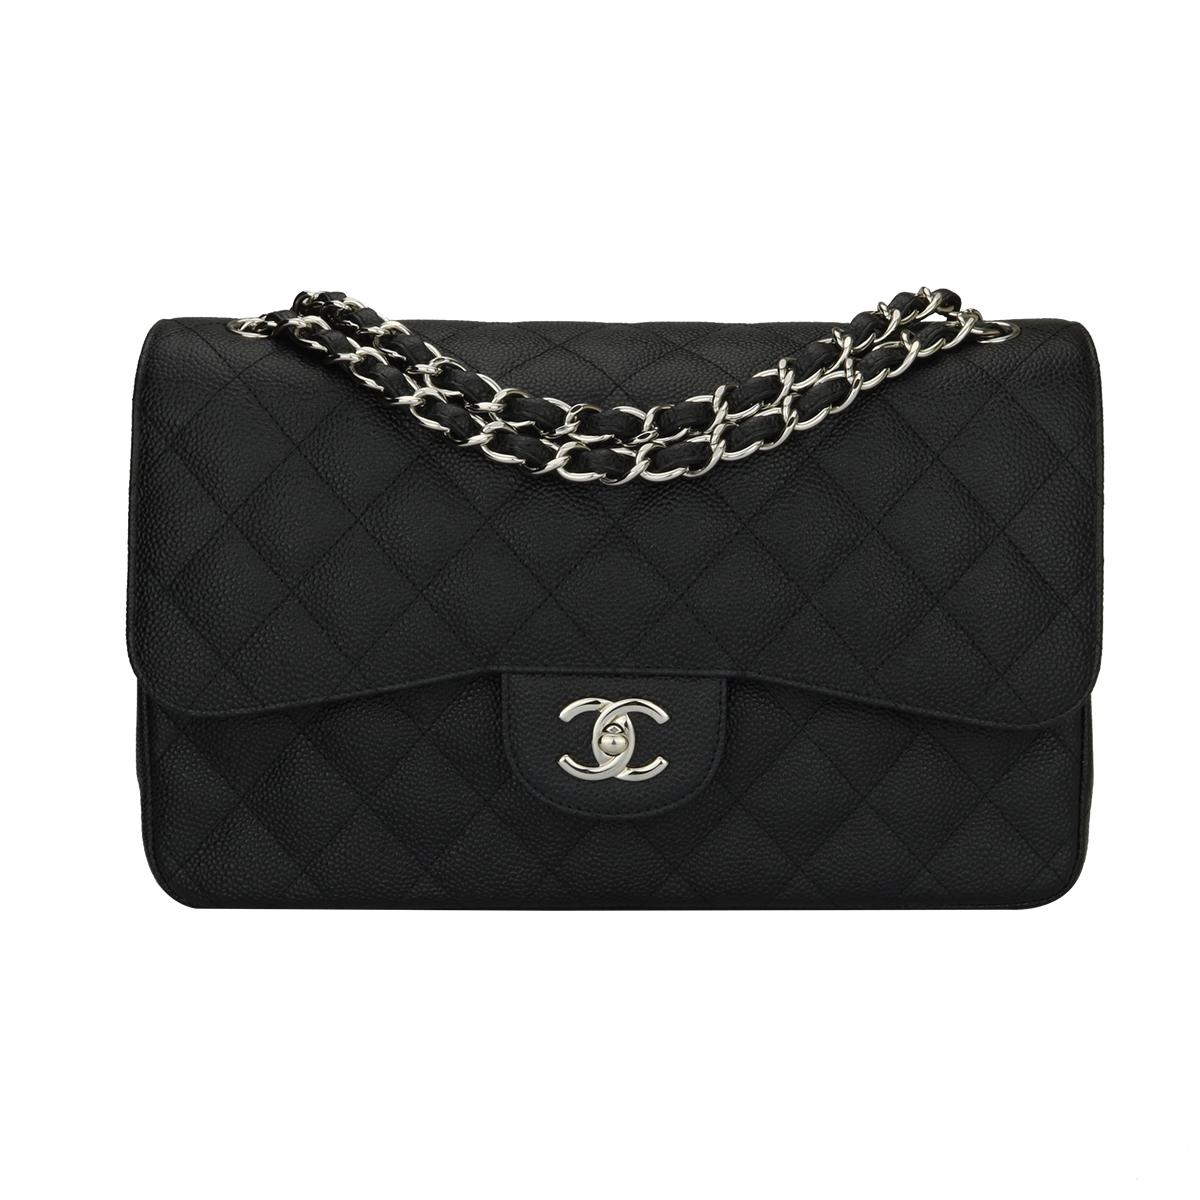 CHANEL Classic Jumbo Double Flap Black Caviar with Silver Hardware 2012